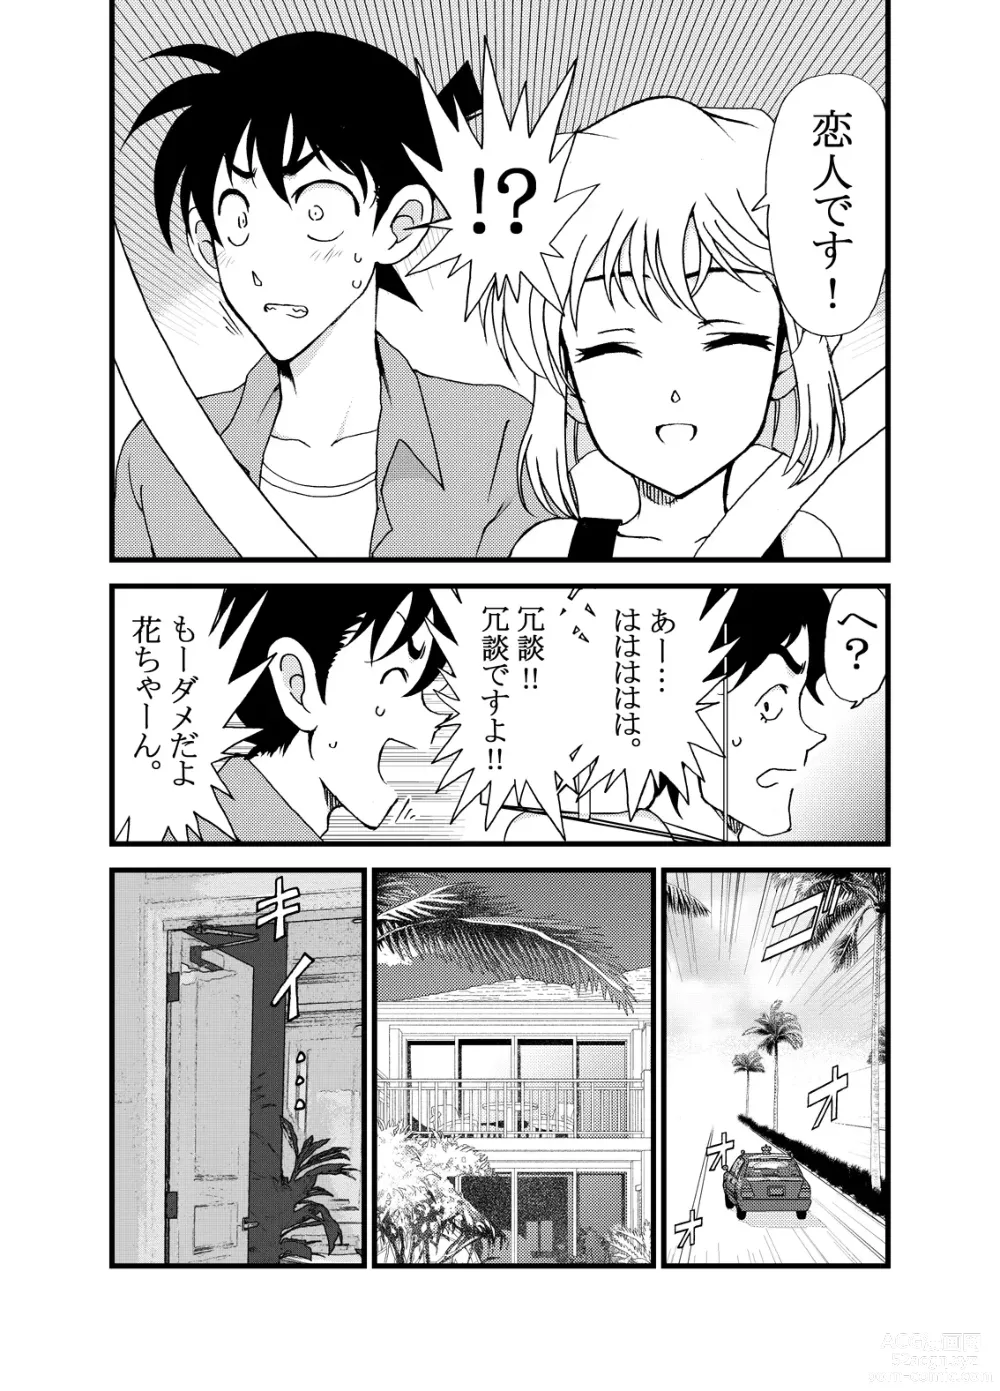 Page 5 of doujinshi Summer Resort Preview